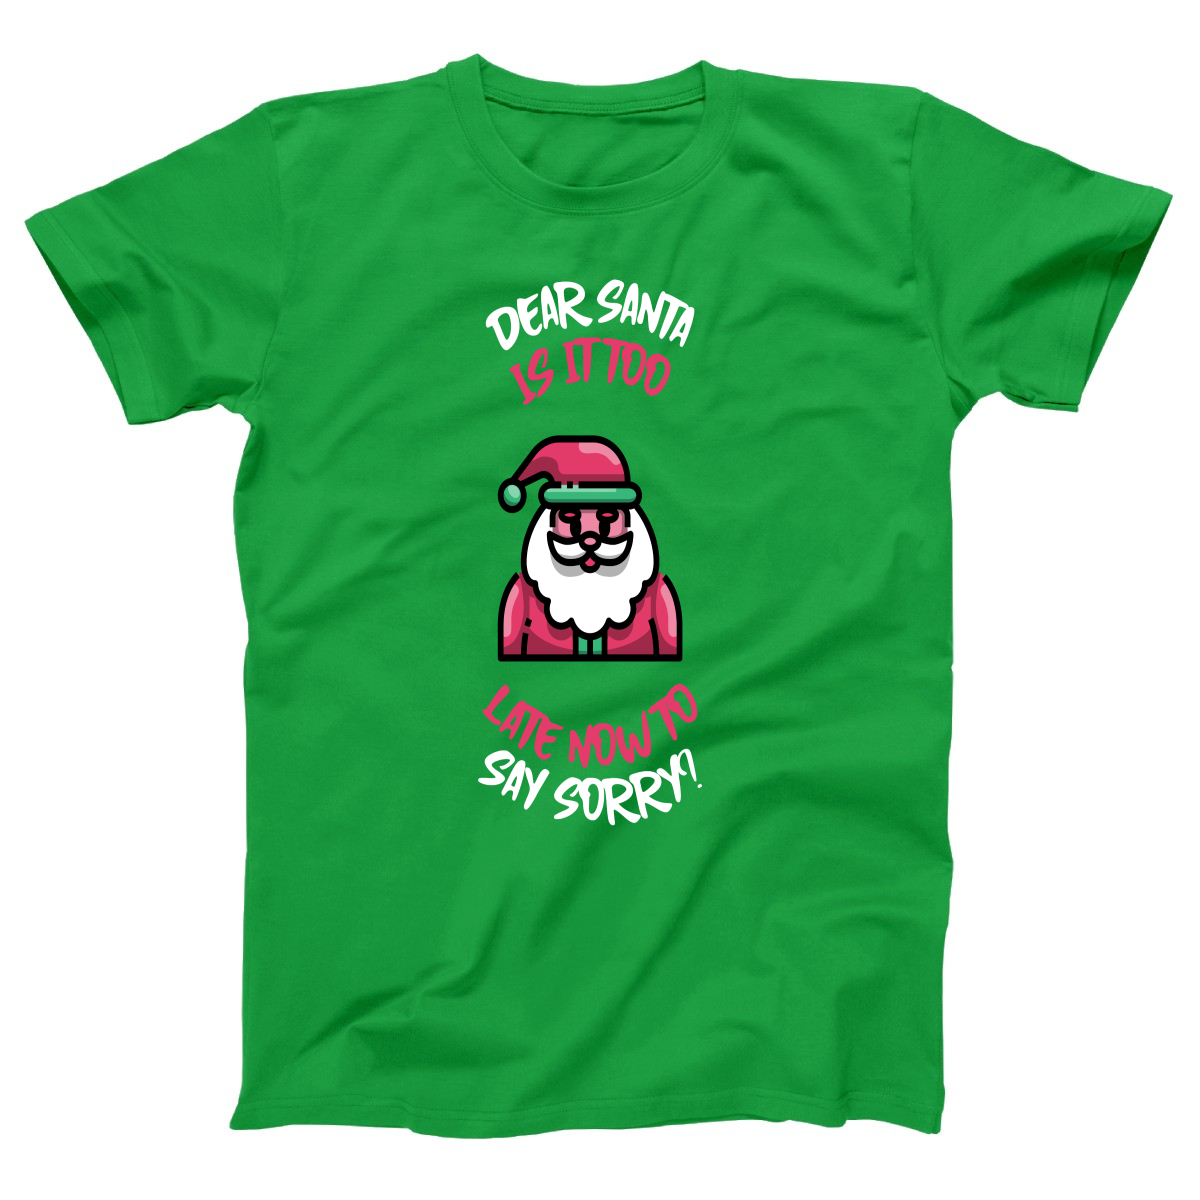 Dear Santa, Is It Too Late to Say Sorry? Women's T-shirt | Green